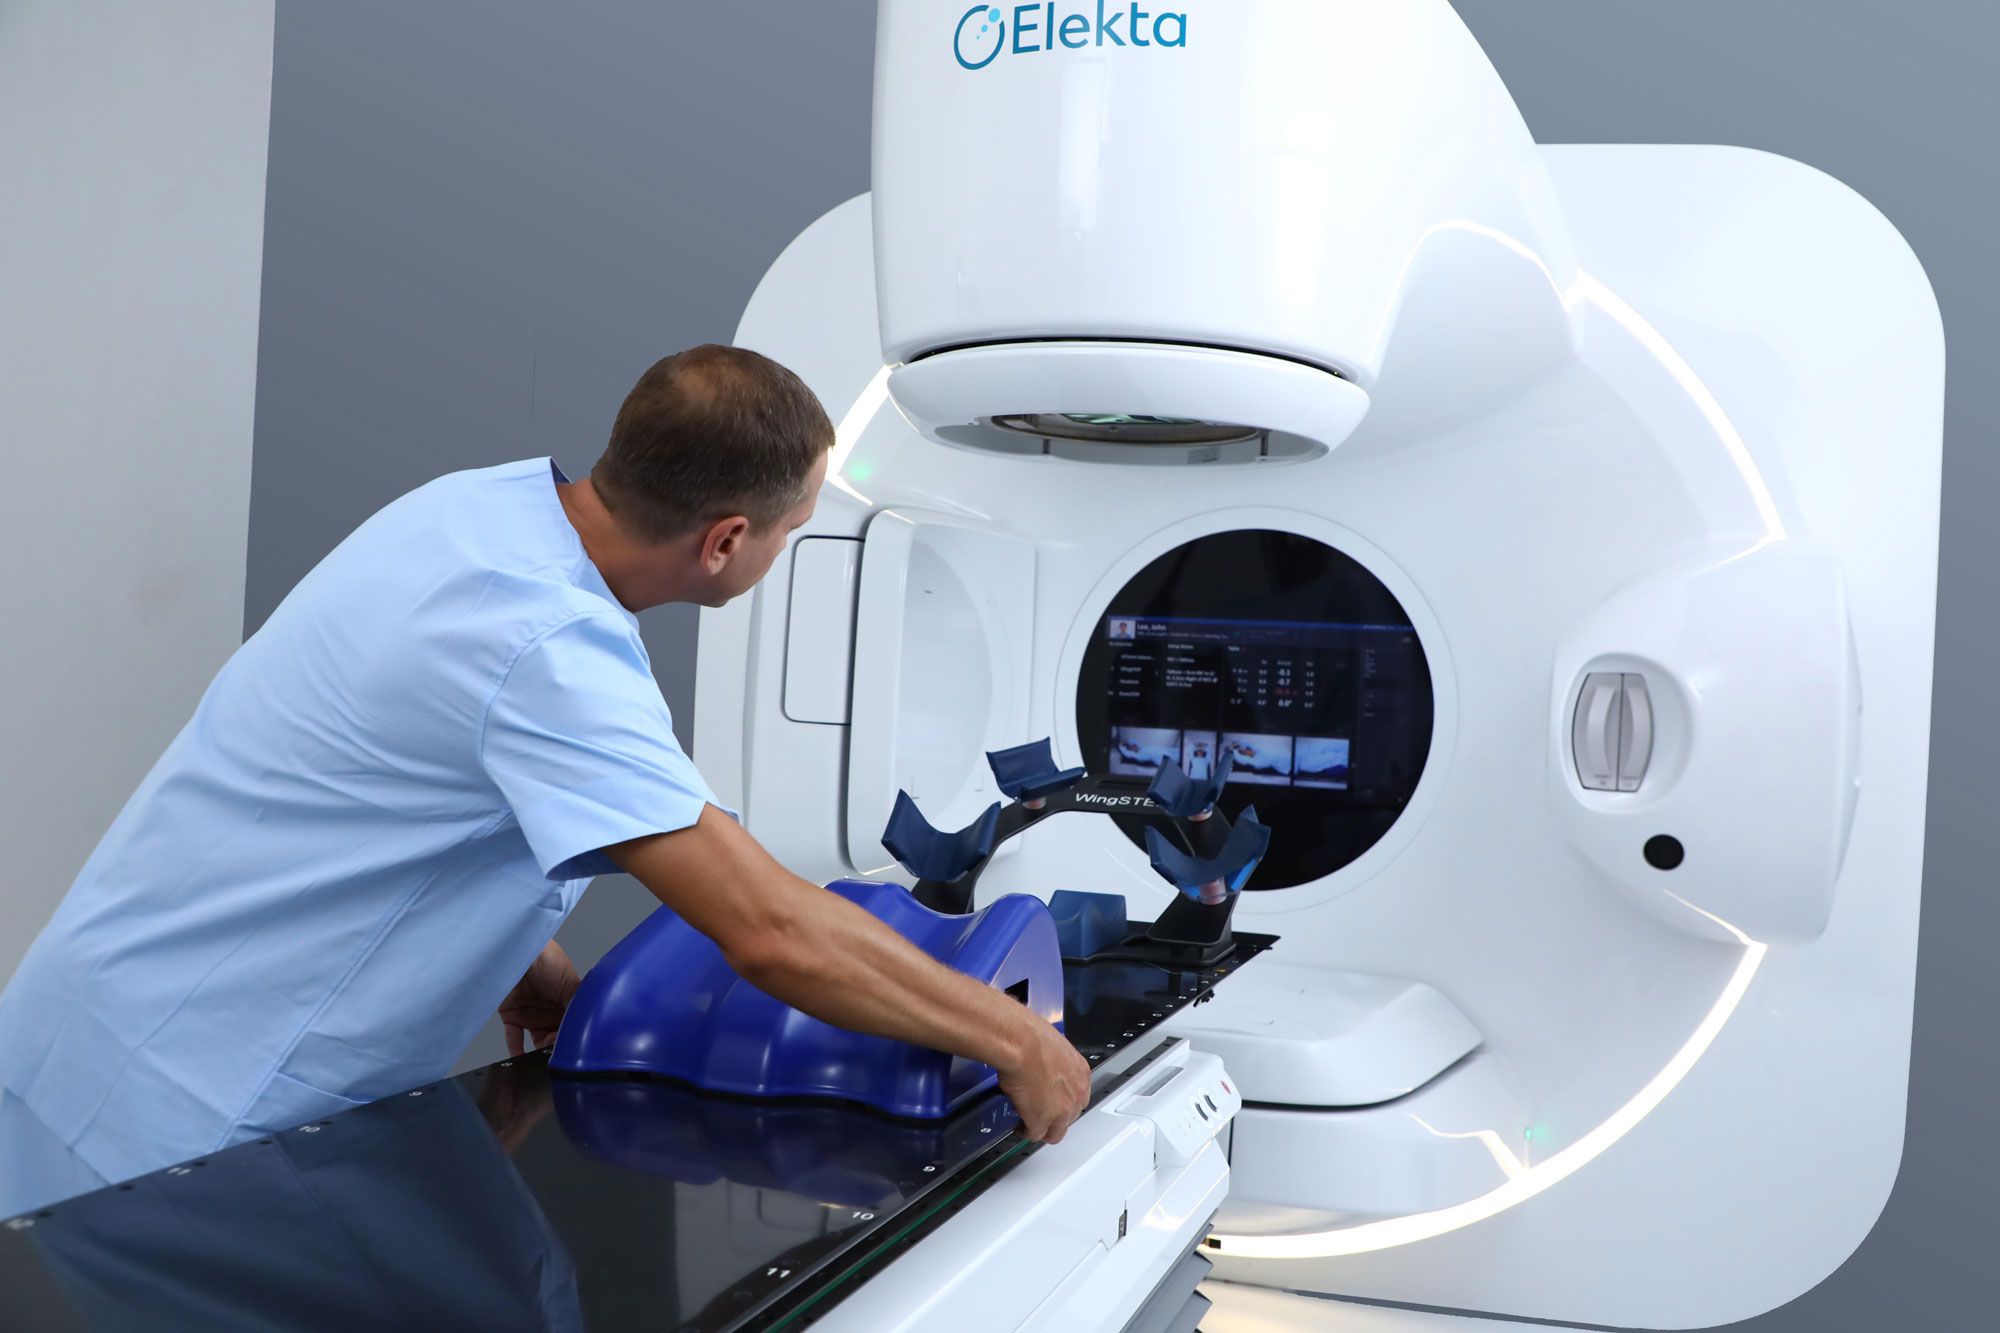 world's first clinical elekta harmony linac enables treatment of more patients at turkish medical center